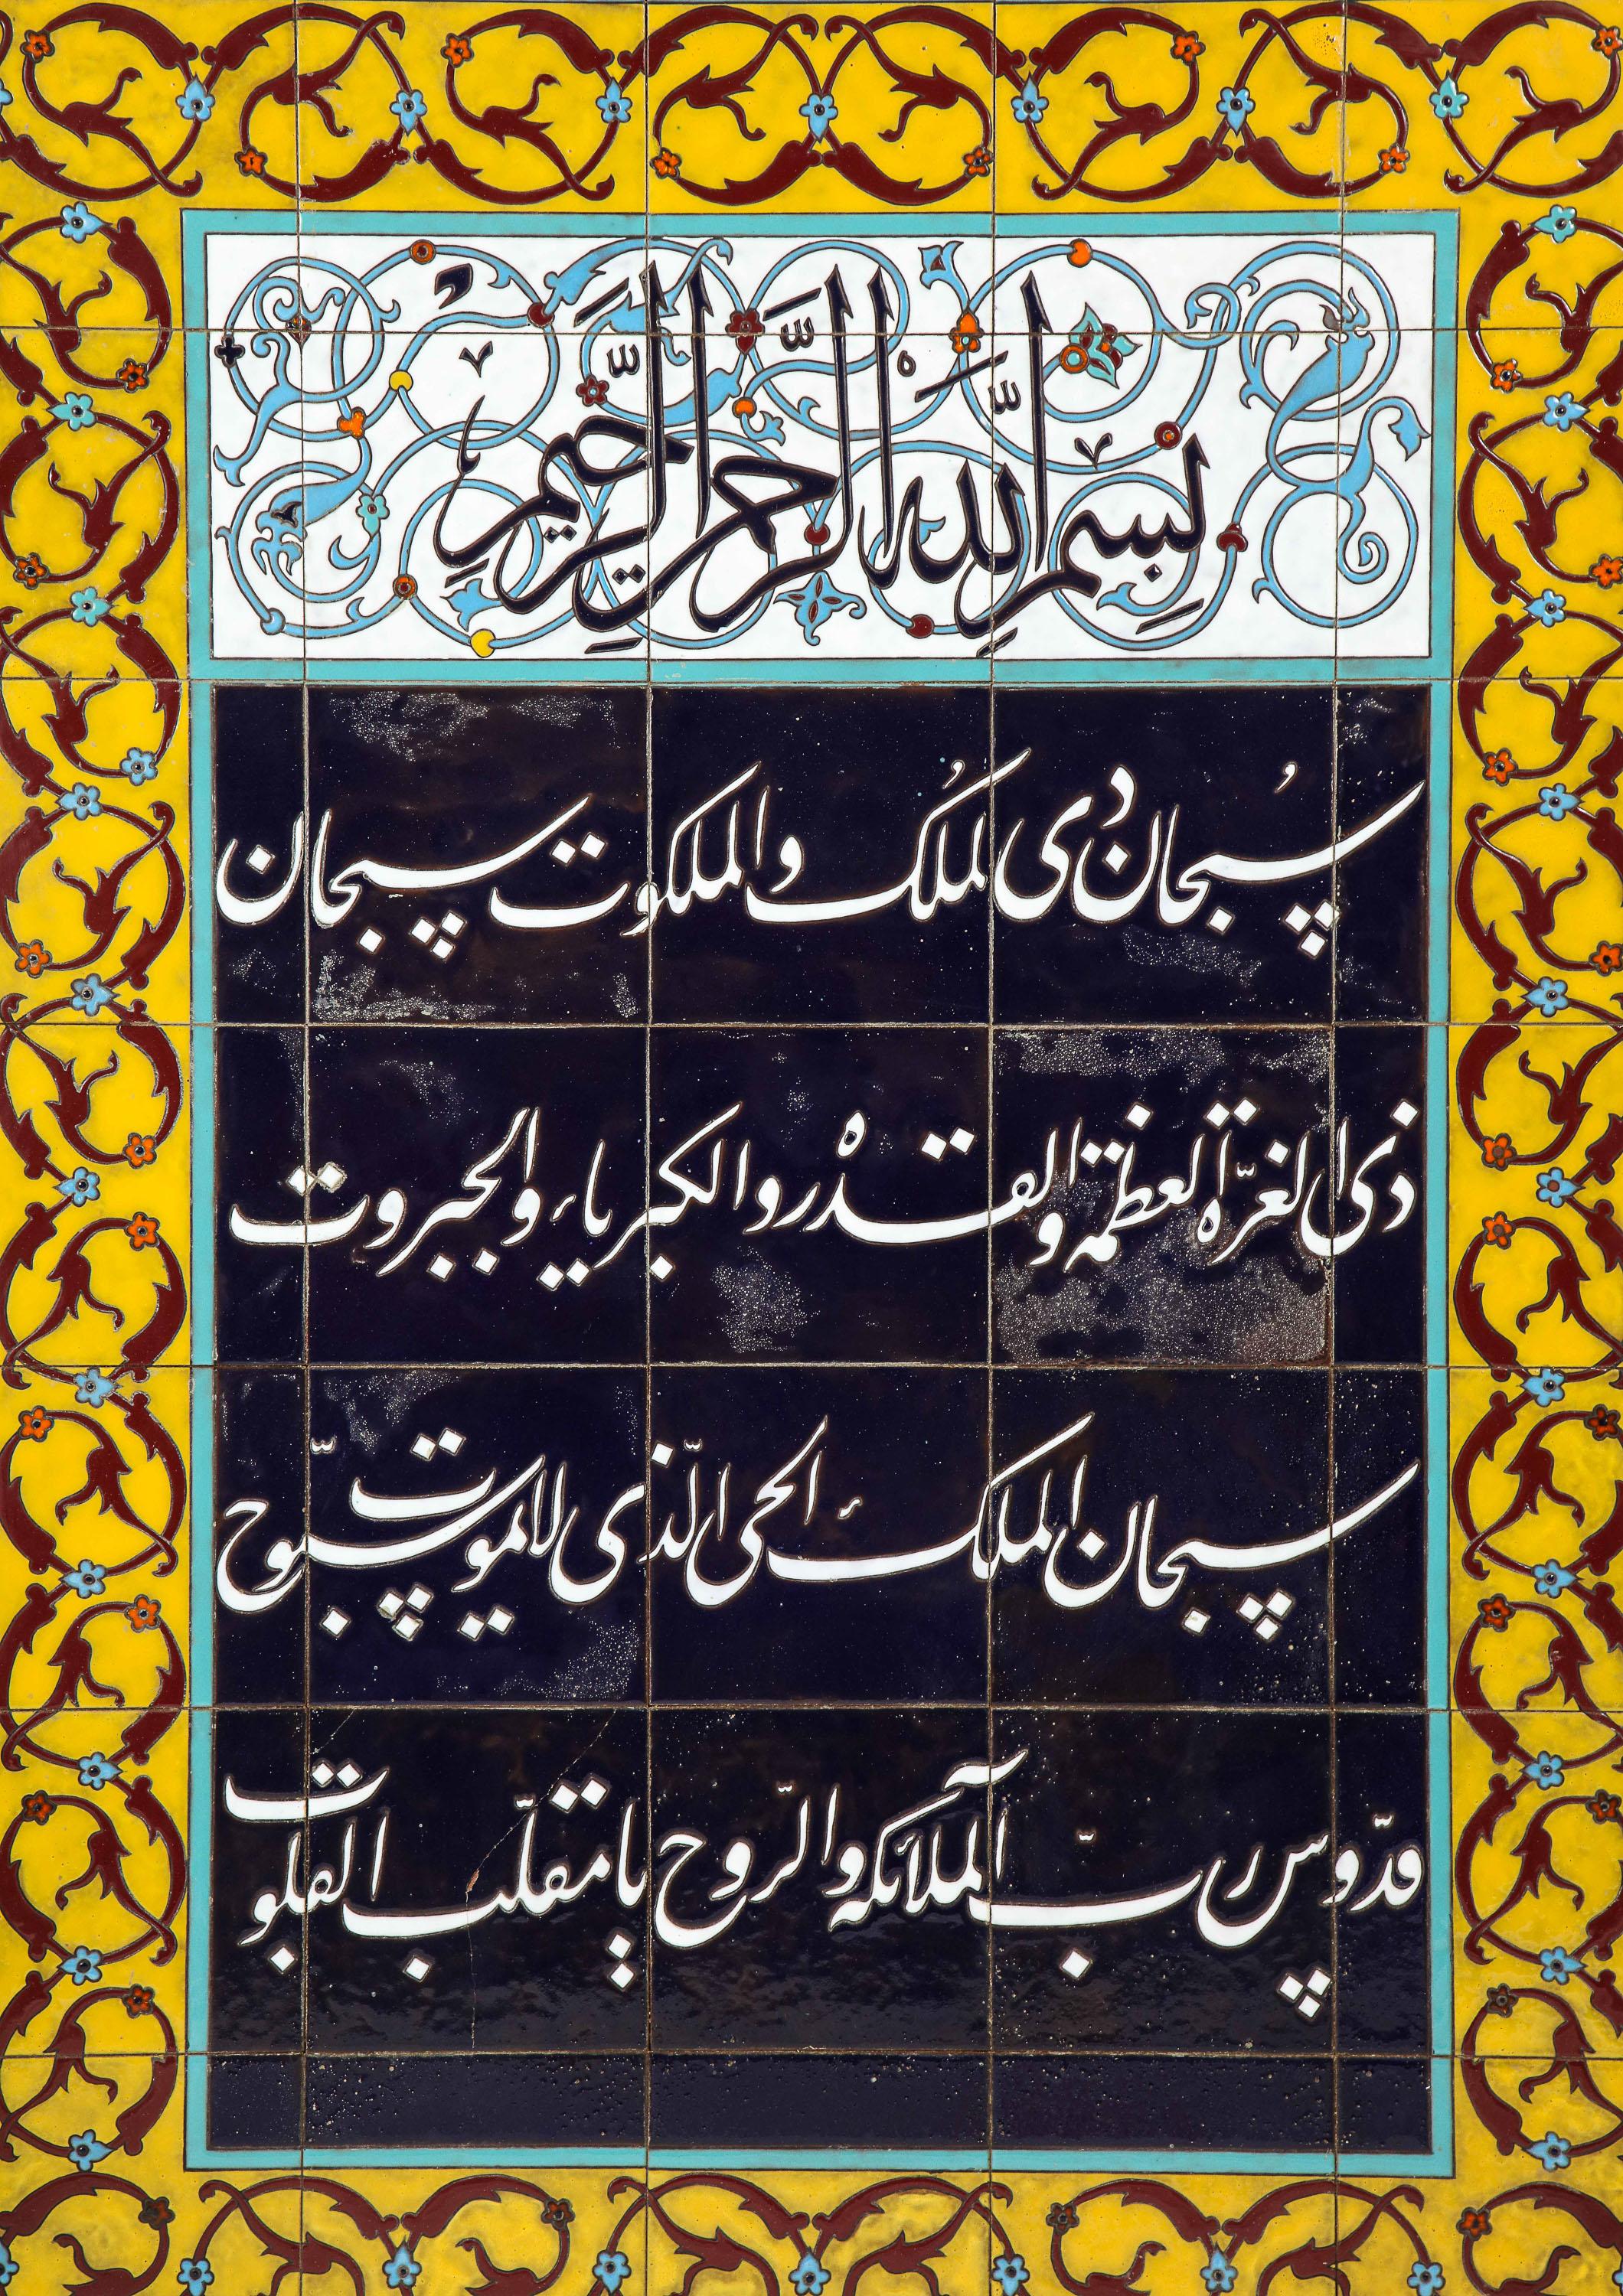 An Exceptional Pair of Islamic Middle Eastern Ceramic Tiles with Quran Verses  15